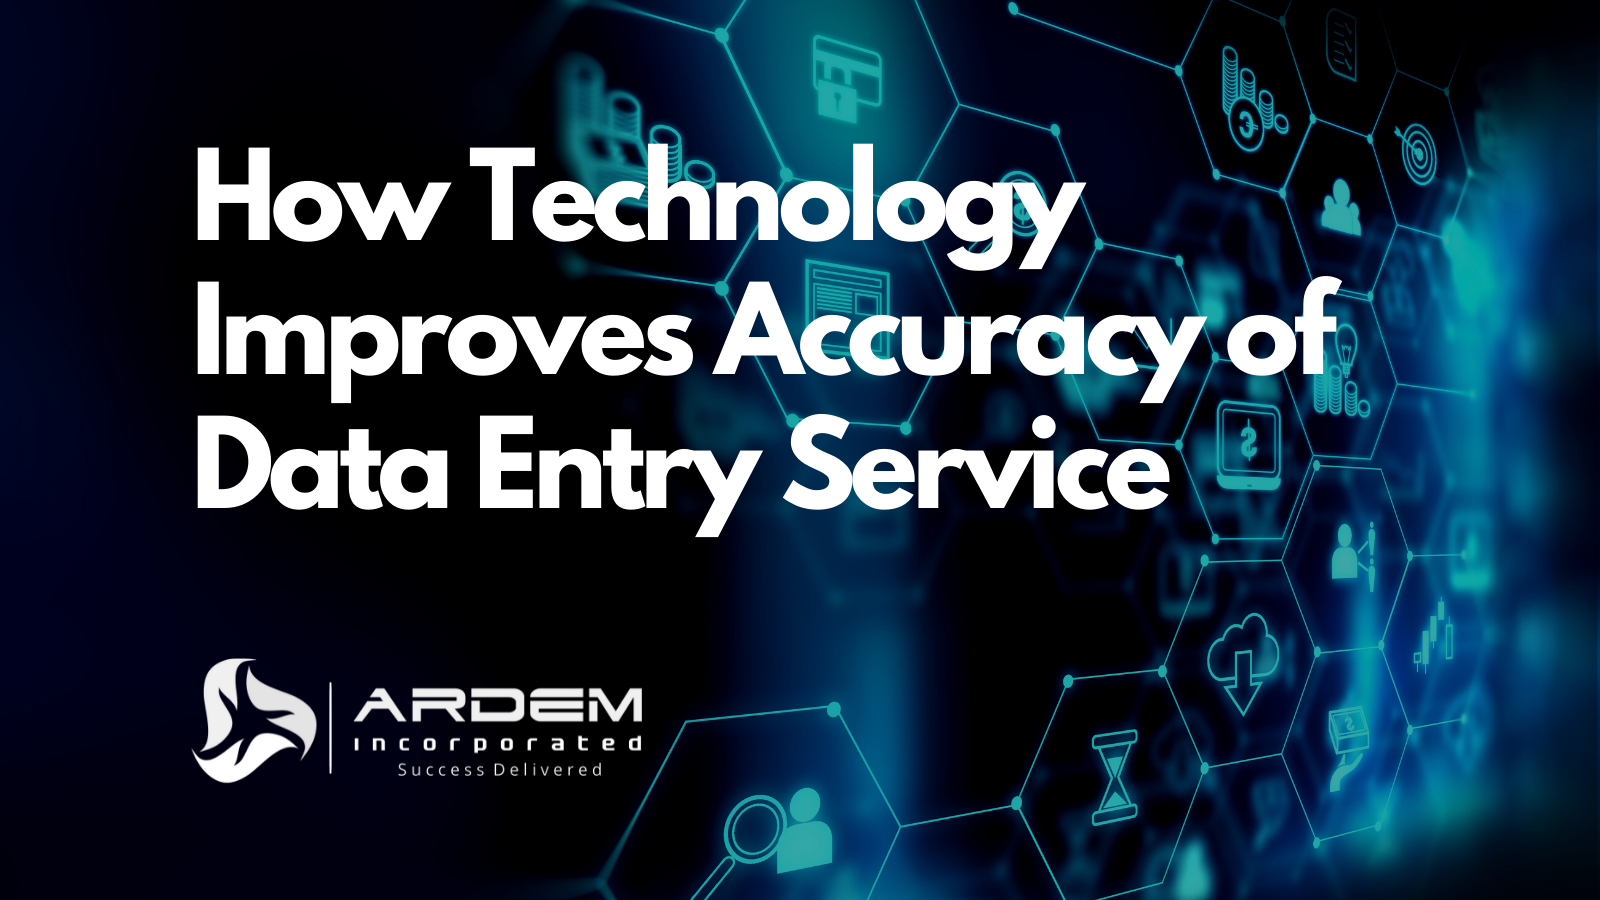 Accuracy of Data Entry Service